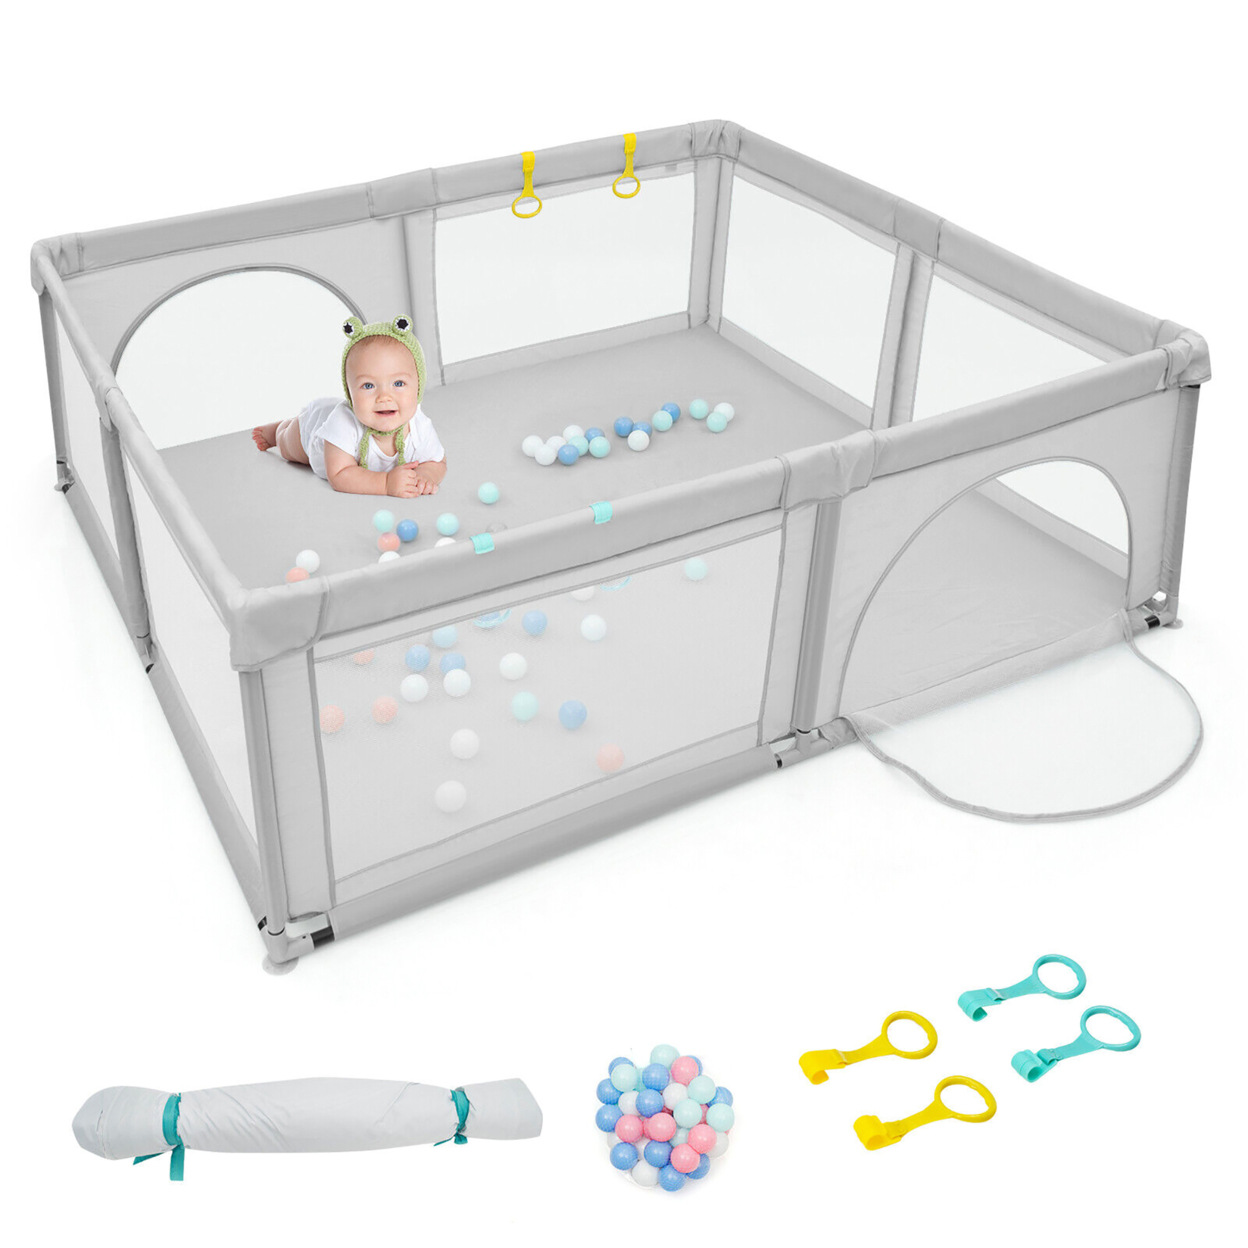 Extra Large Baby Playpen Safety Baby Play Yard W/ 50 Ocean Balls & 4 Handles - Light Grey